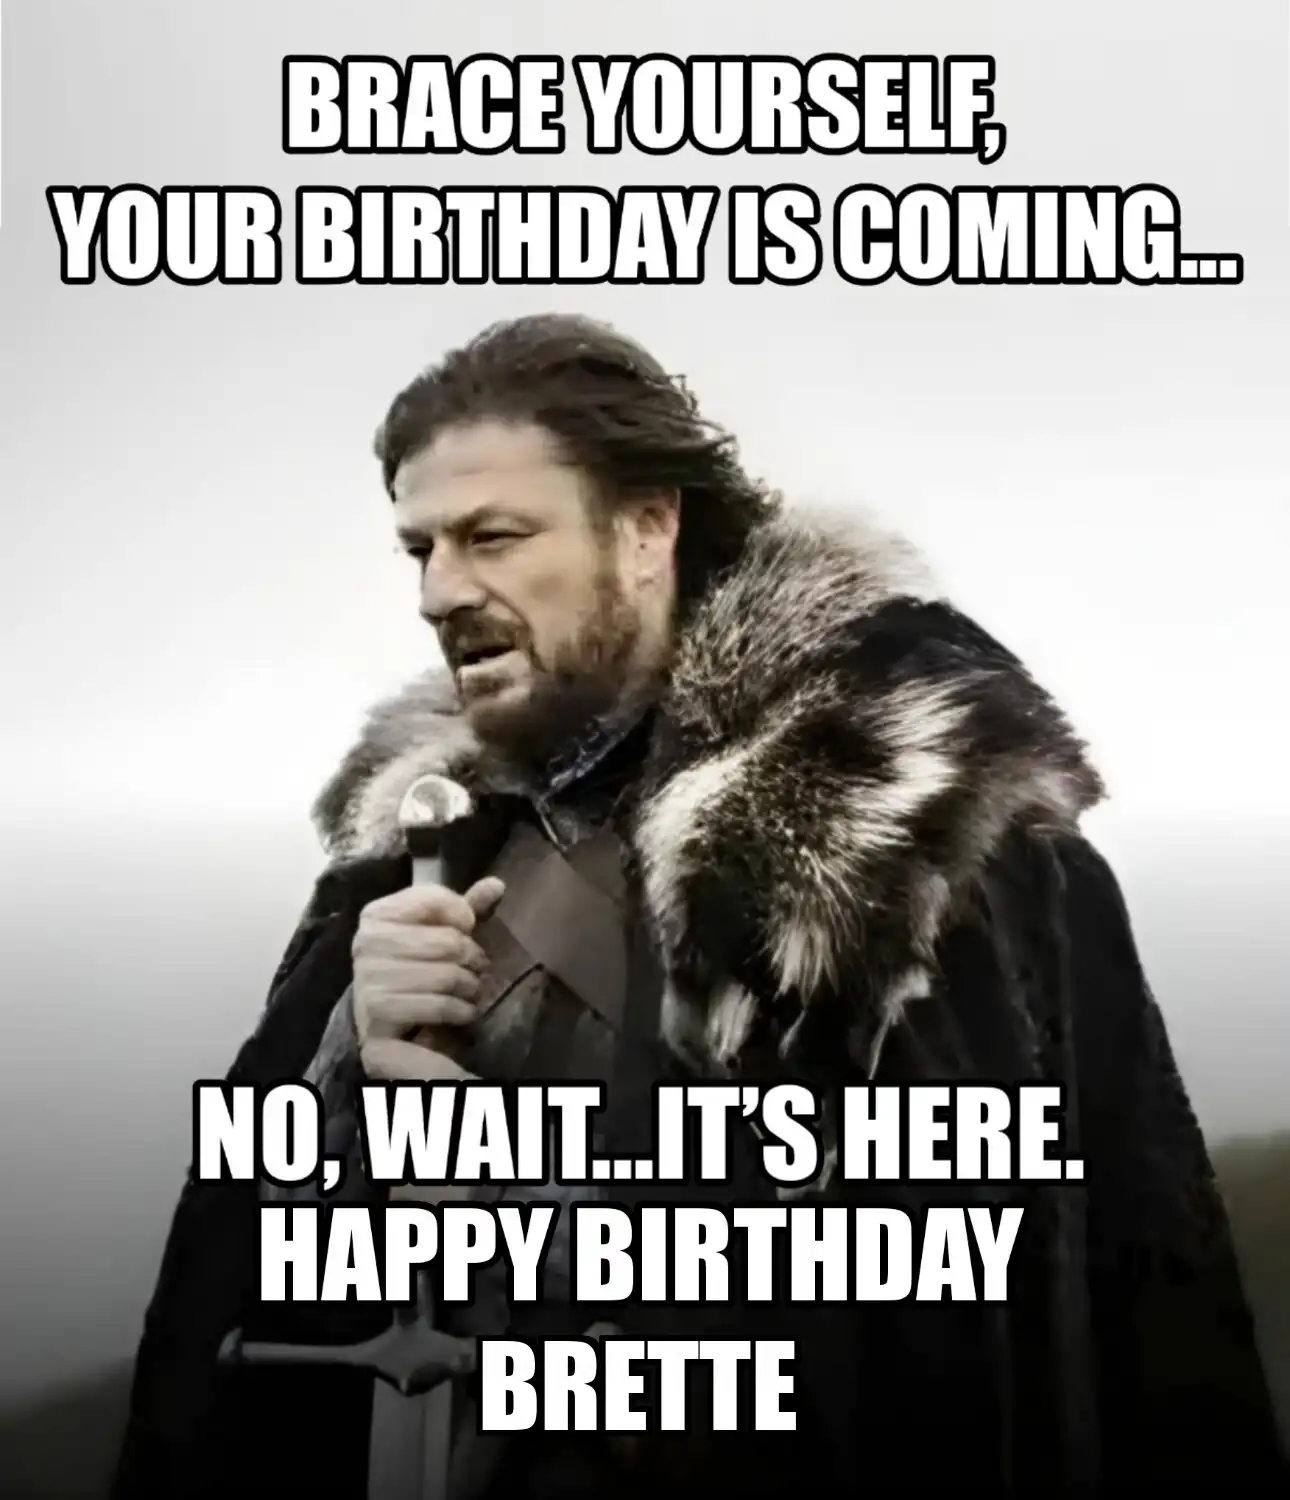 Happy Birthday Brette Brace Yourself Your Birthday Is Coming Meme